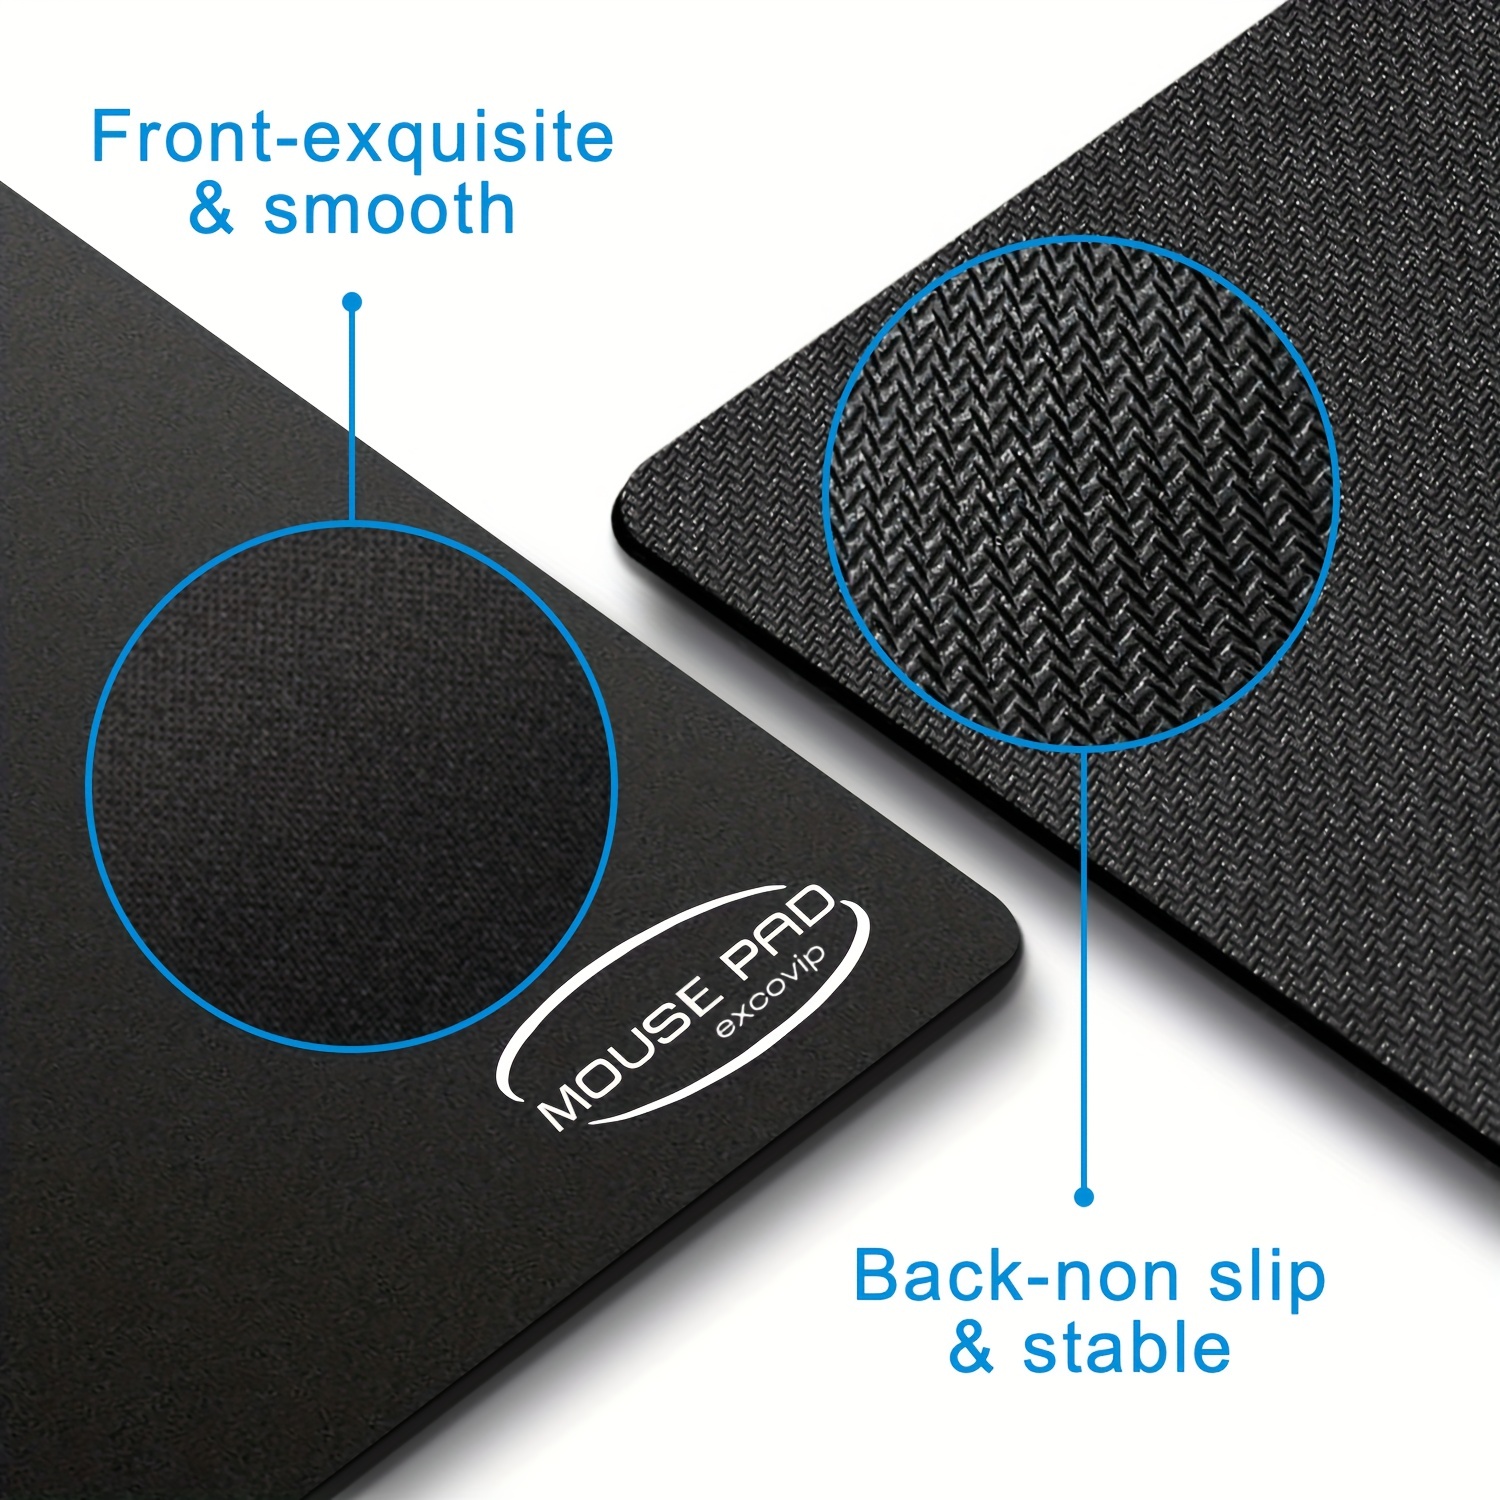 Ergonomic Mouse Mat Wrist Rest Support, Gel Mouse Pad With Non